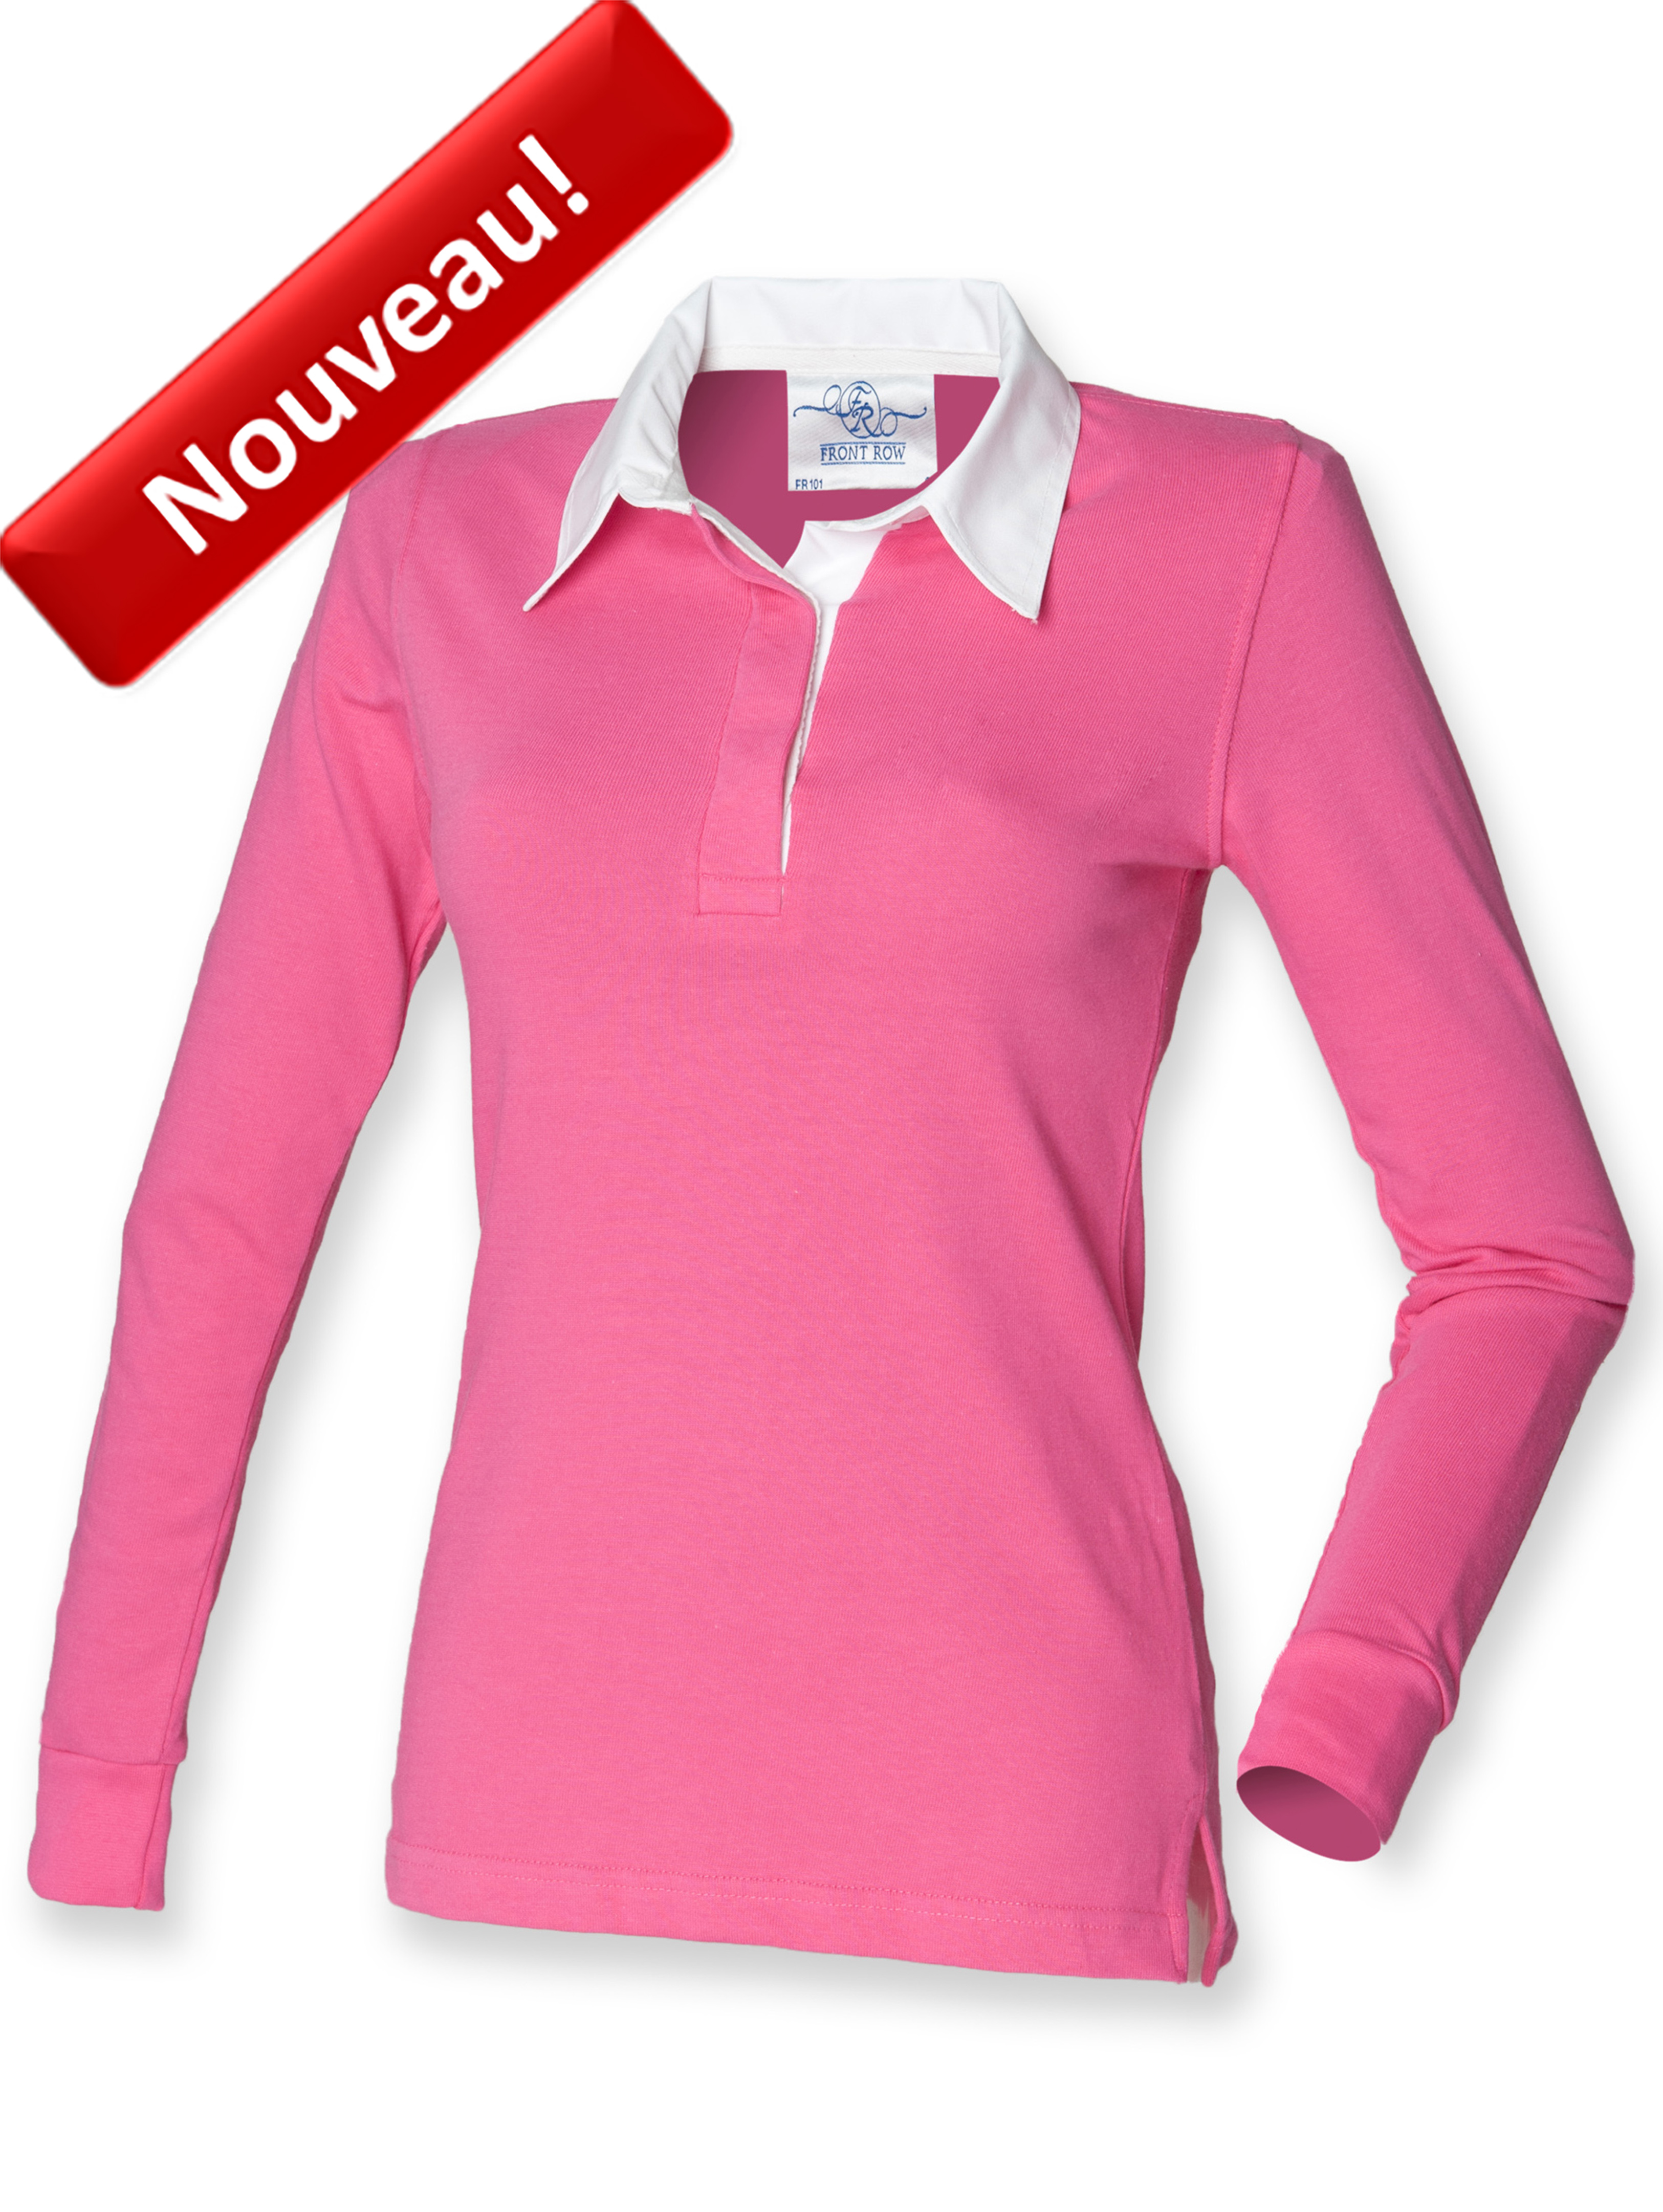 POLO RUGBY FEMME Manches longues FR101 FRONT ROW Nouveau